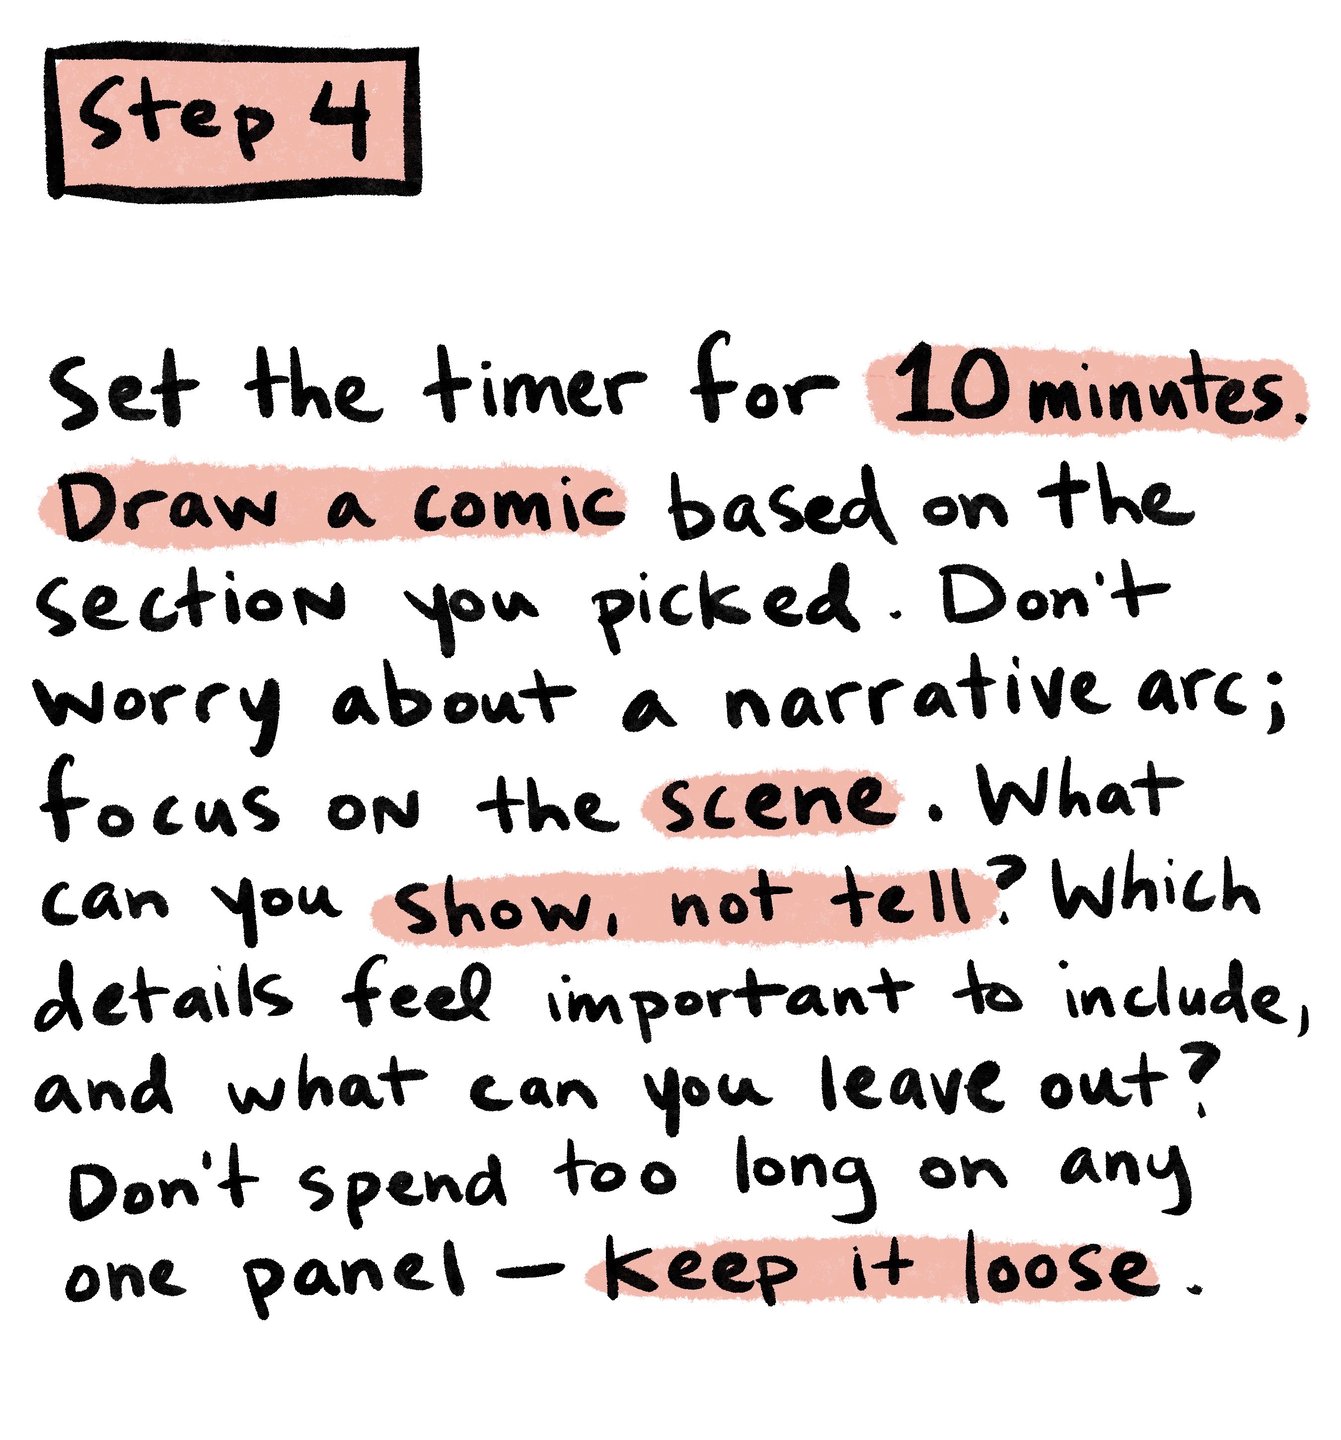 This is Step 4. The text reads: Set the timer for 10 minutes. Draw a comic based on the section you picked. Don't worry about a narrative arc; focus on the scene. What can you show, not tell? Which details feel important to include, and what can you leave out? Don't spend too long on any one panel—keep it loose.